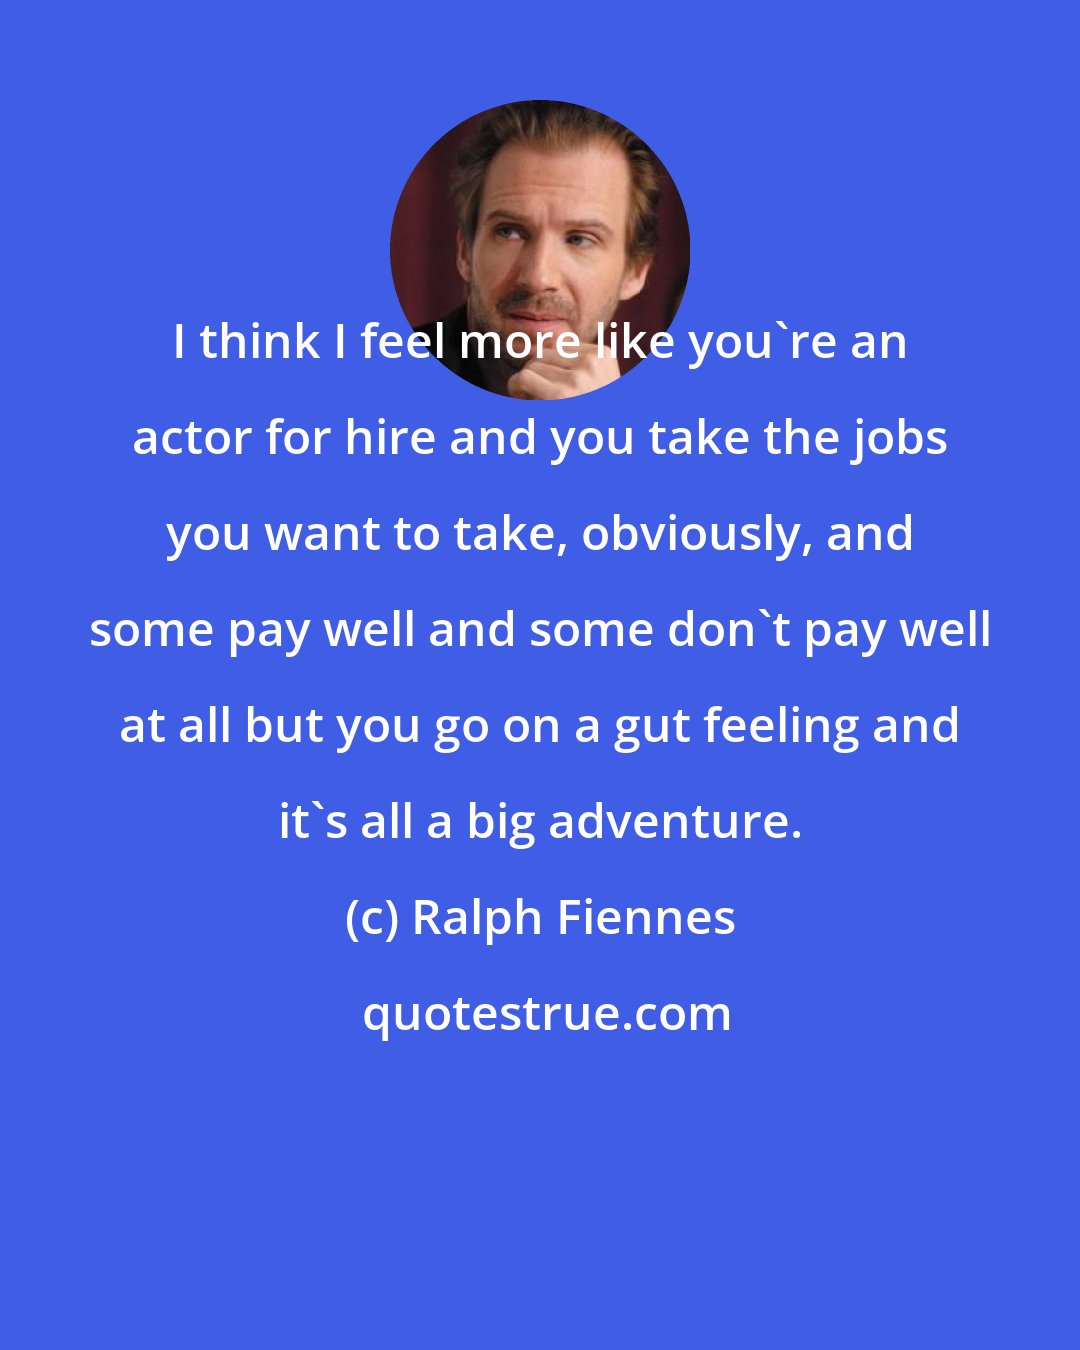 Ralph Fiennes: I think I feel more like you're an actor for hire and you take the jobs you want to take, obviously, and some pay well and some don't pay well at all but you go on a gut feeling and it's all a big adventure.